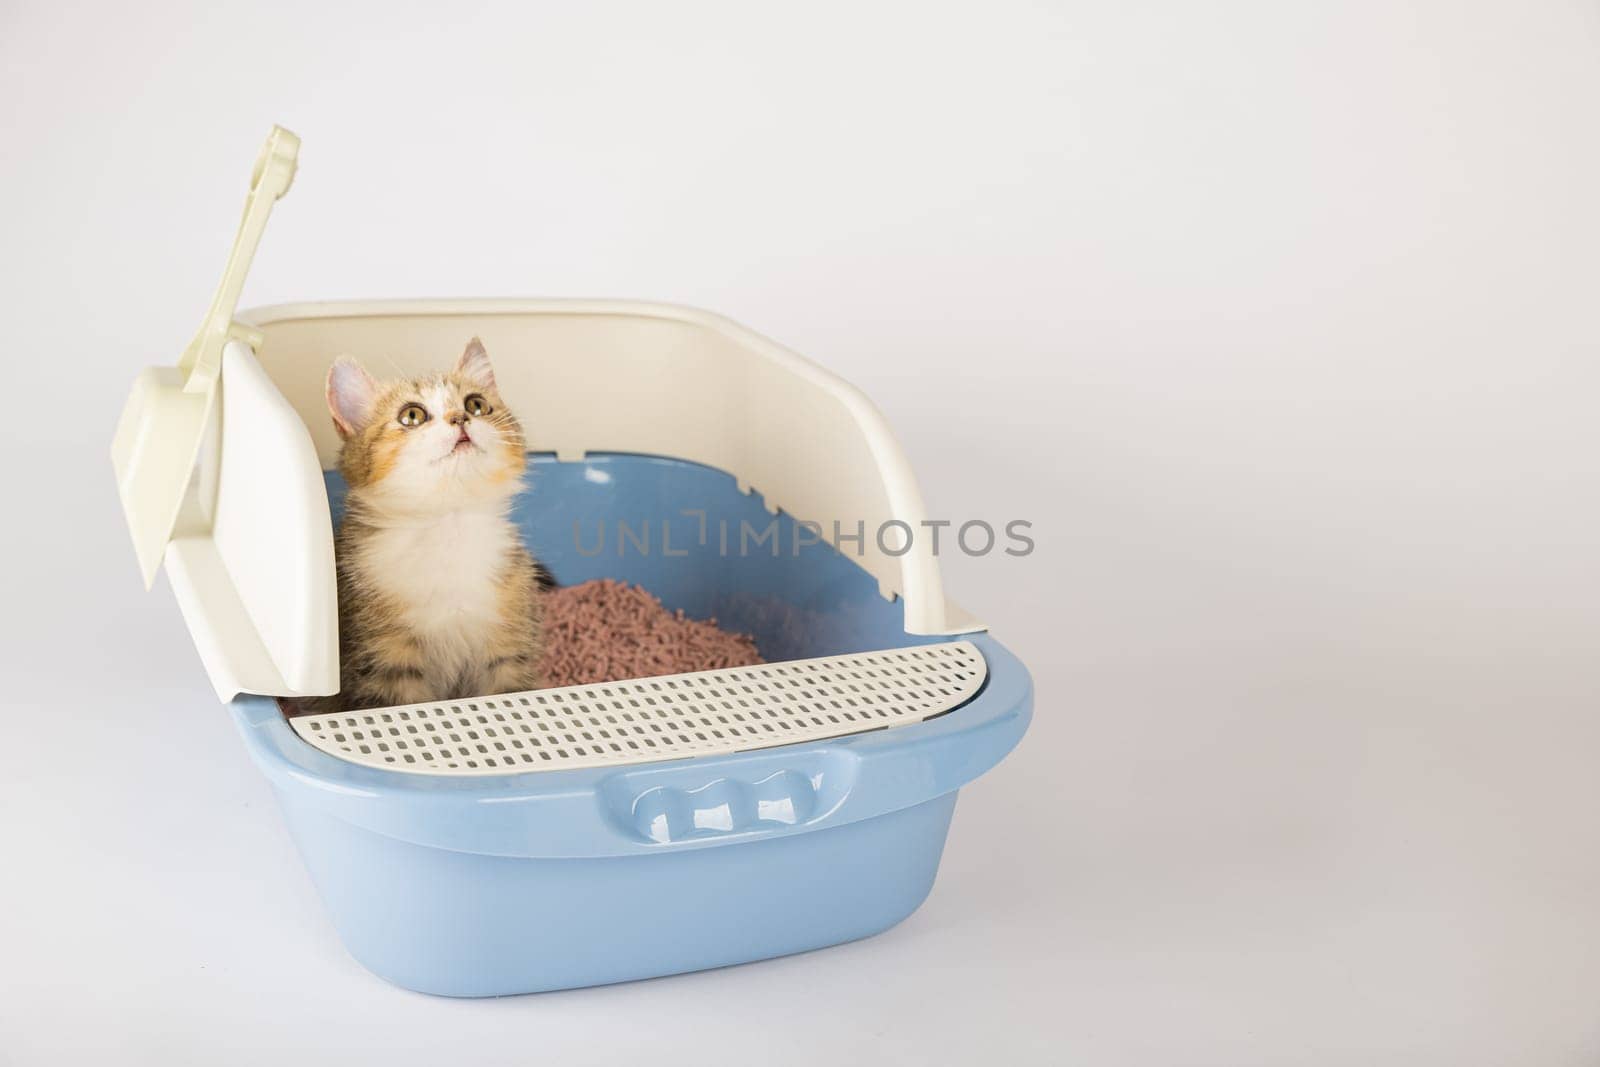 The cat's hygiene and care are in focus as it occupies a litter box in isolation. The cat tray on a clean white background serves as the designated toilet for this feline.